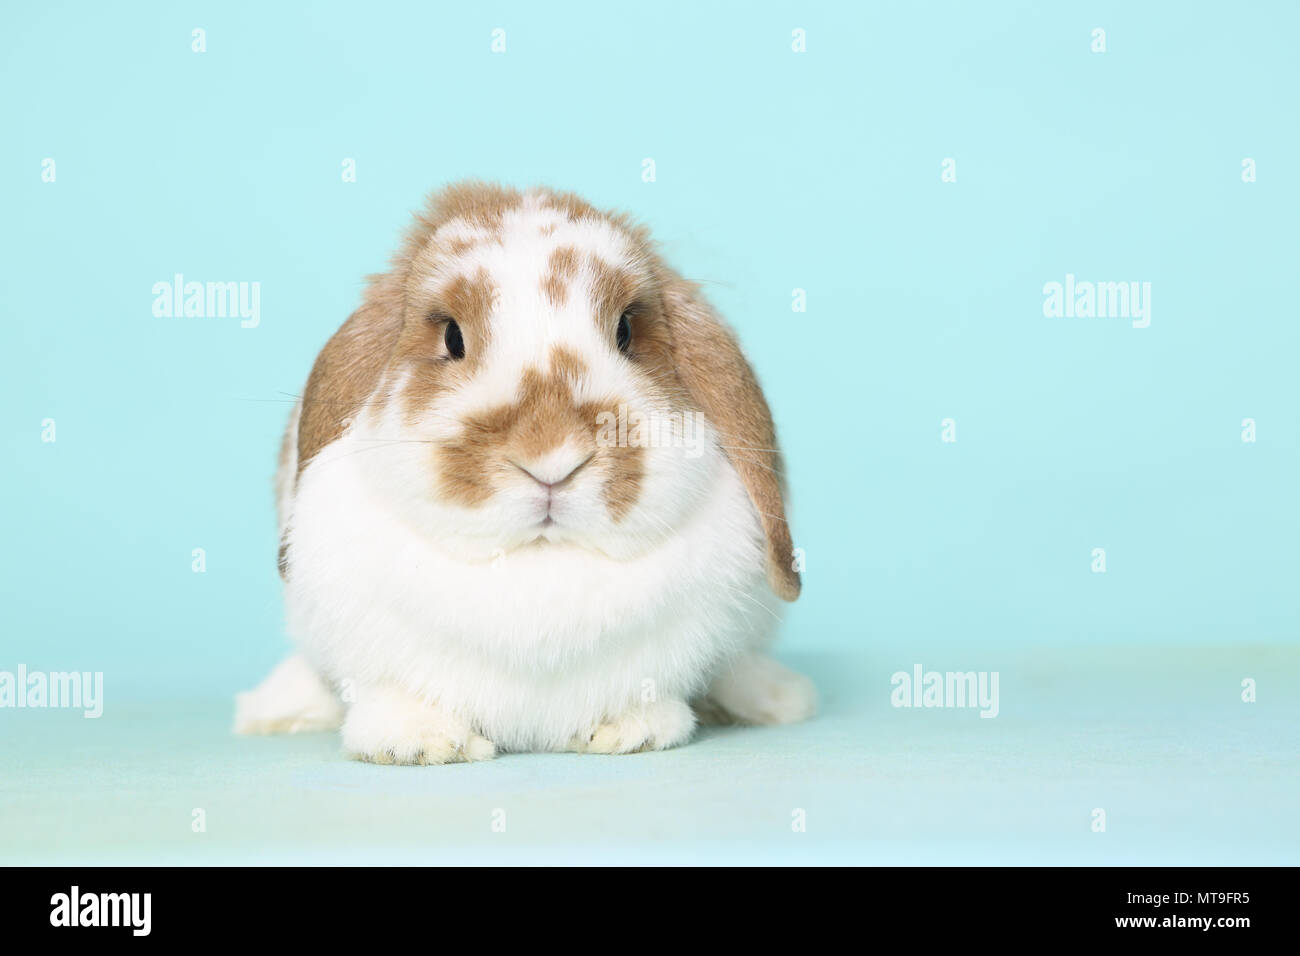 Dwarf Lop-eared Rabbit sitting, seen head-on. Studio picture against a light blue background Stock Photo